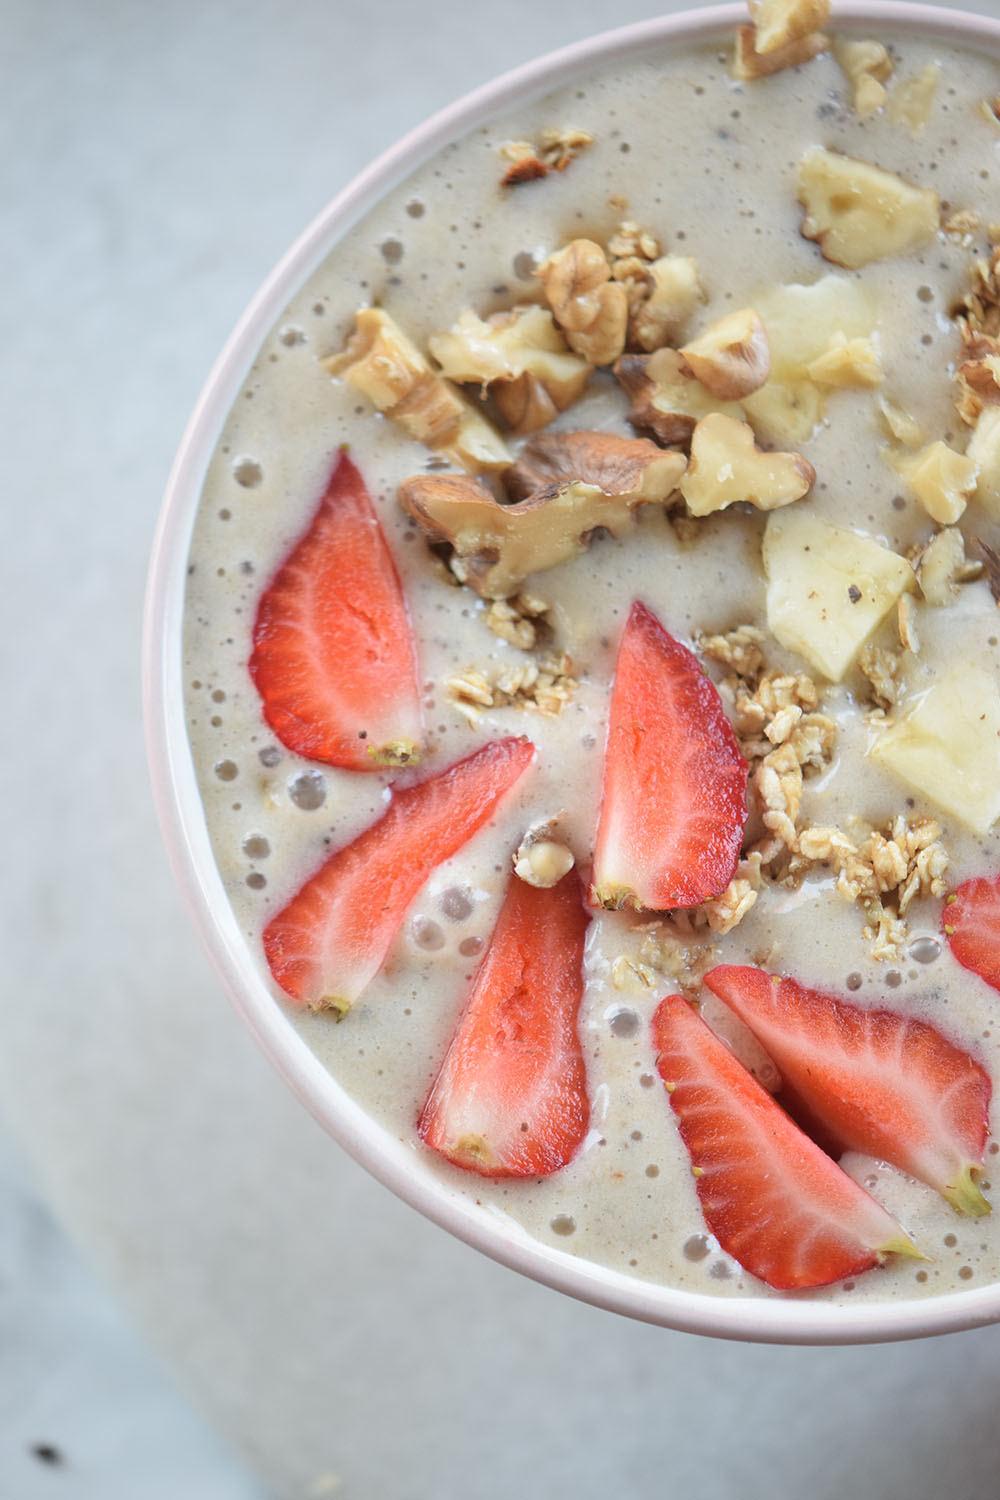 This Strawberry Banana and Walnut Smoothie Bowl is delicious and nutritious!!